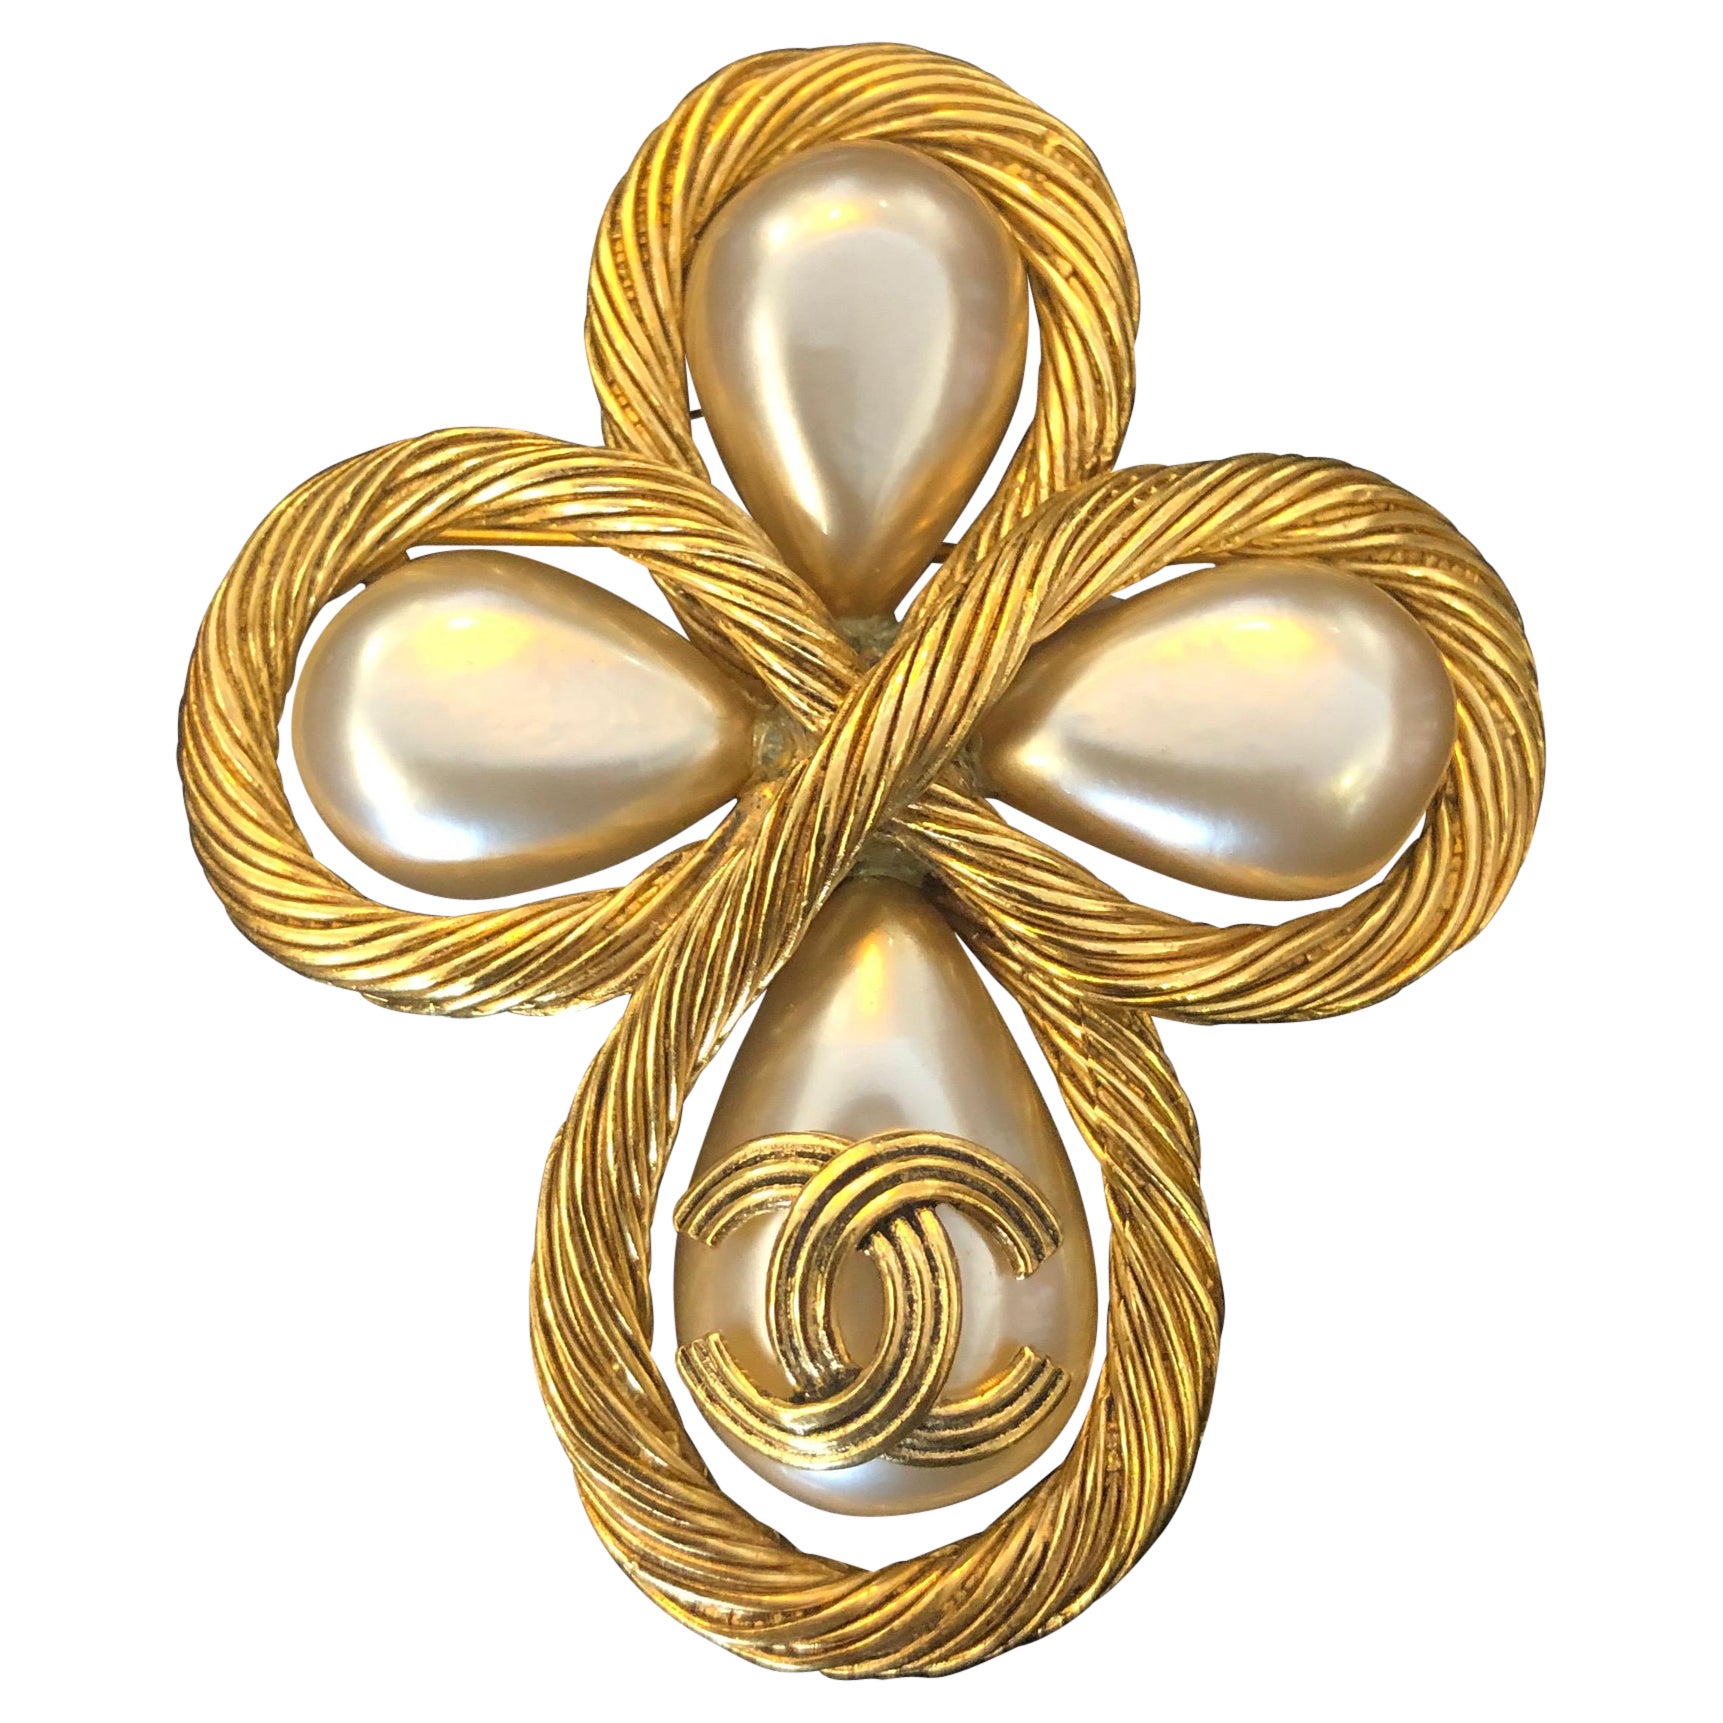 1990s Vintage CHANEL Gold Toned Faux Pearl Brooch 